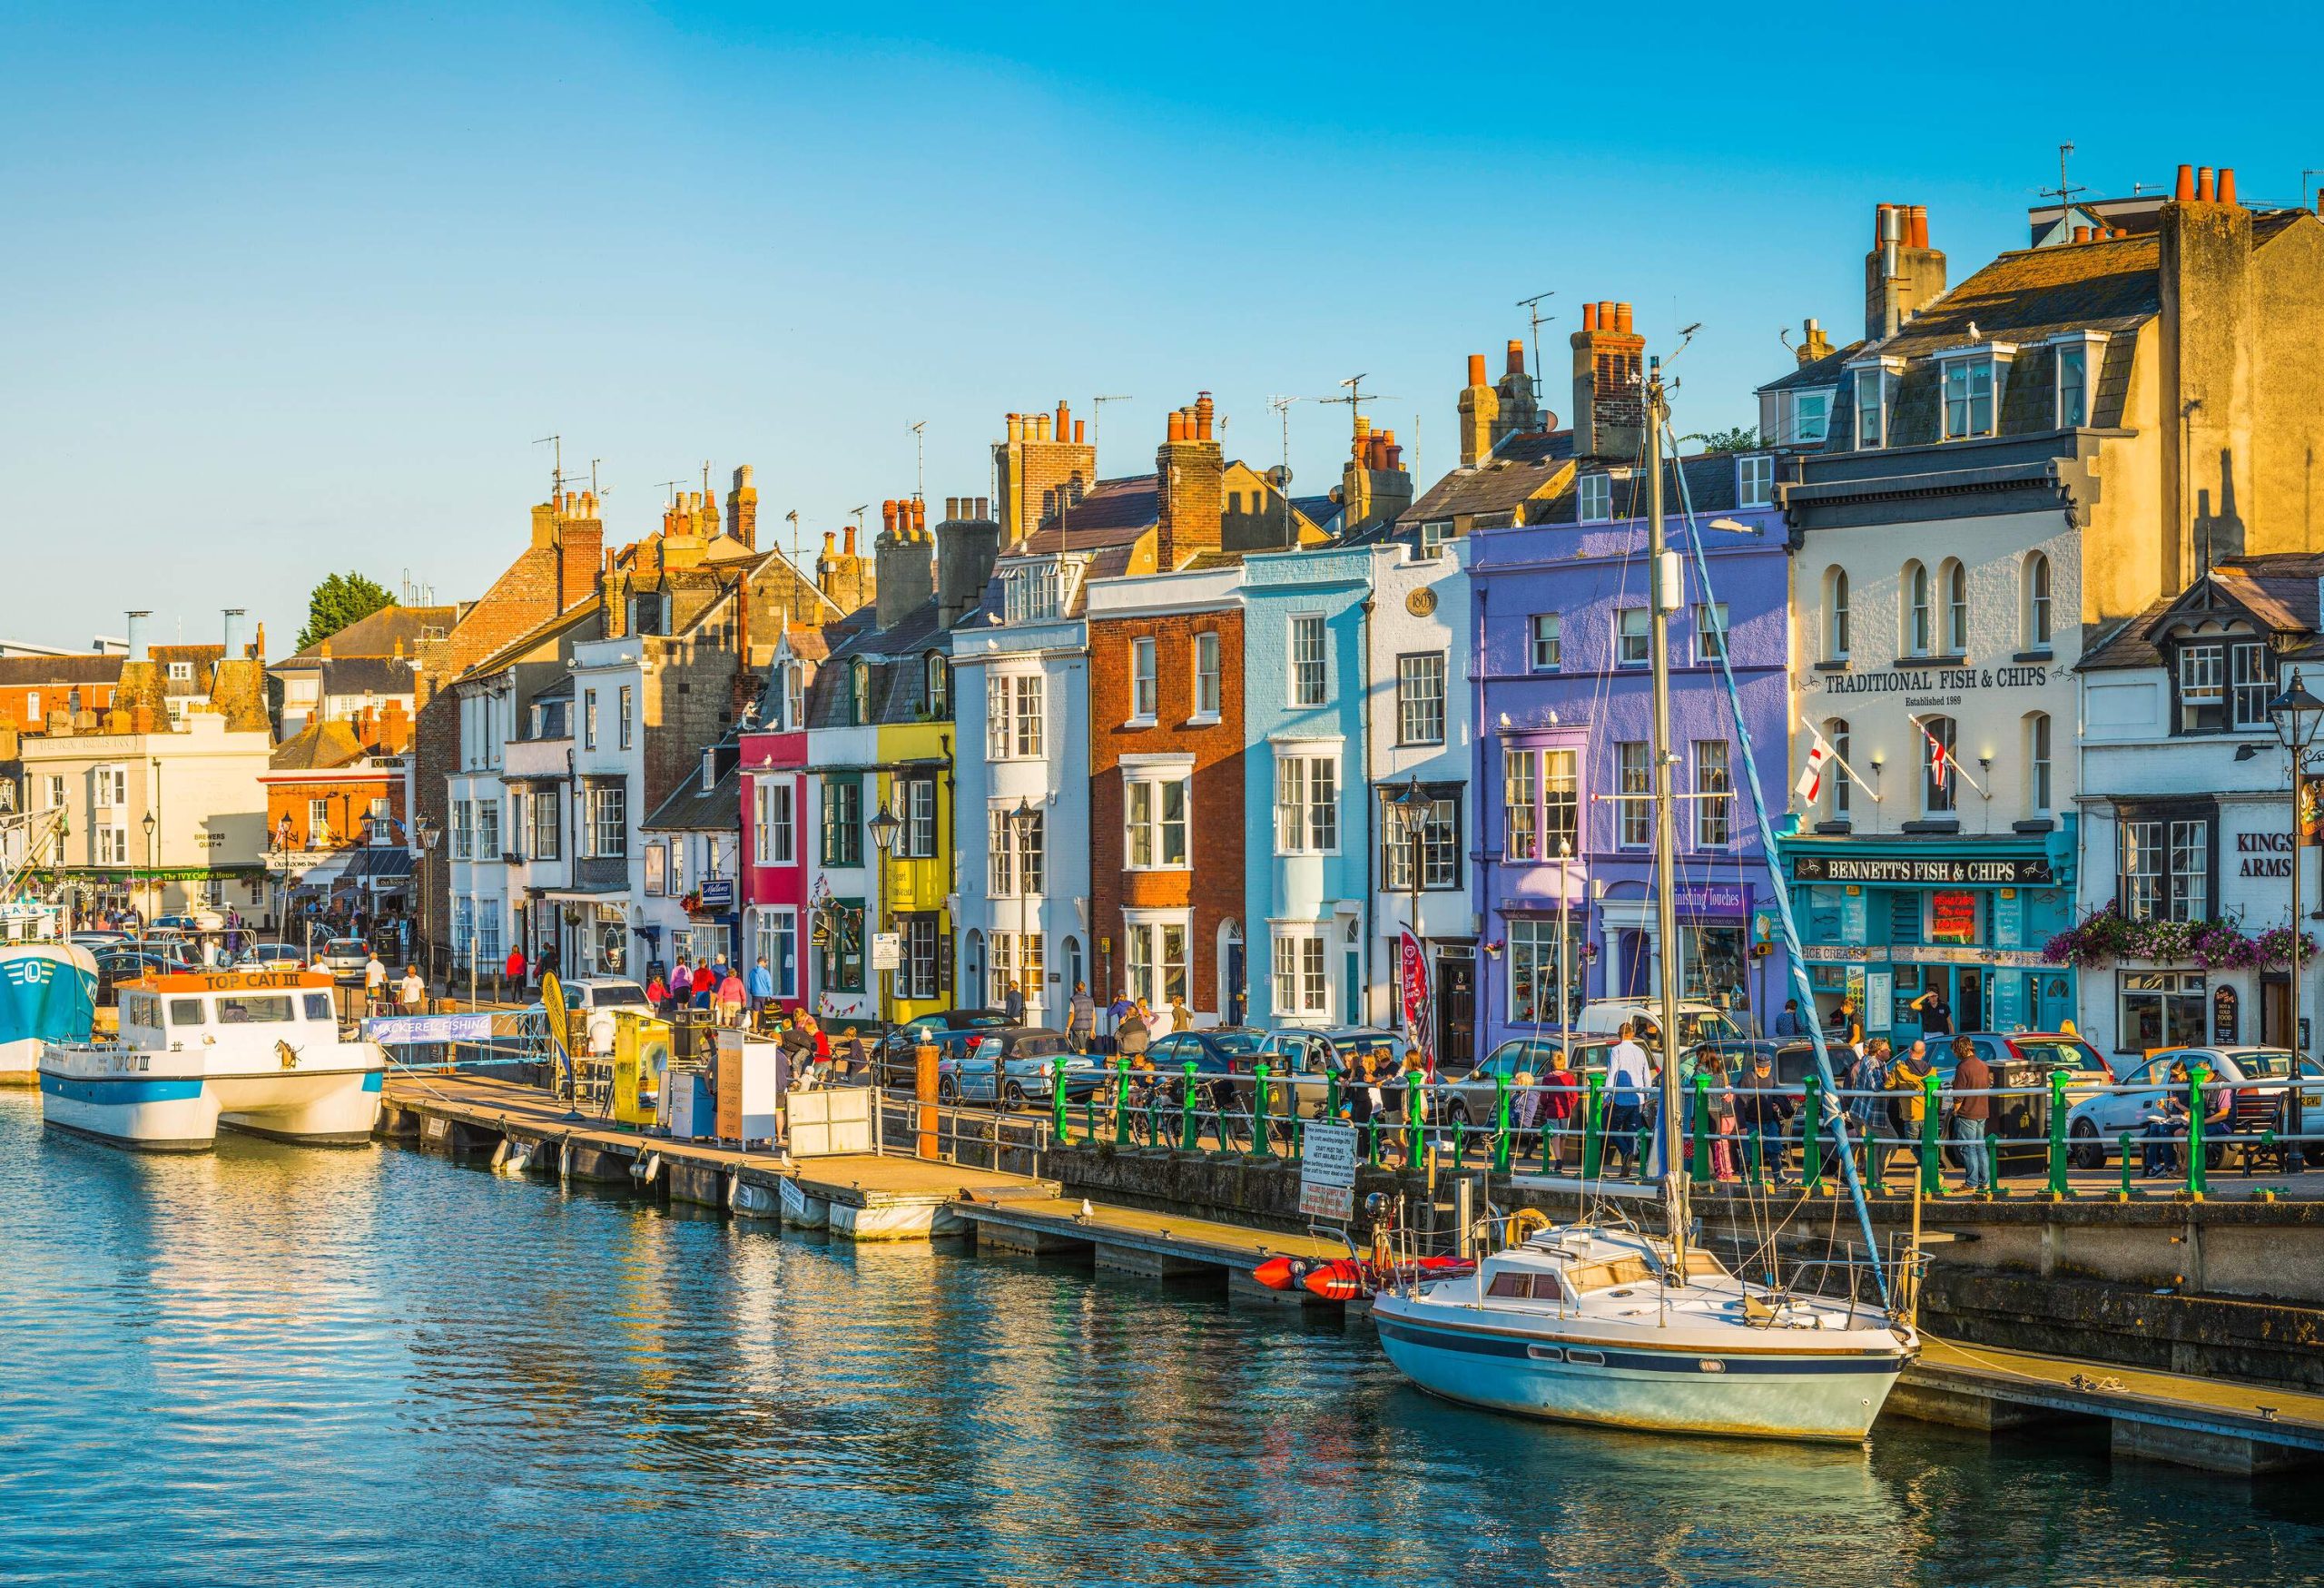 A lively coastal town with boats lining the harbour and brightly coloured buildings along the shore.